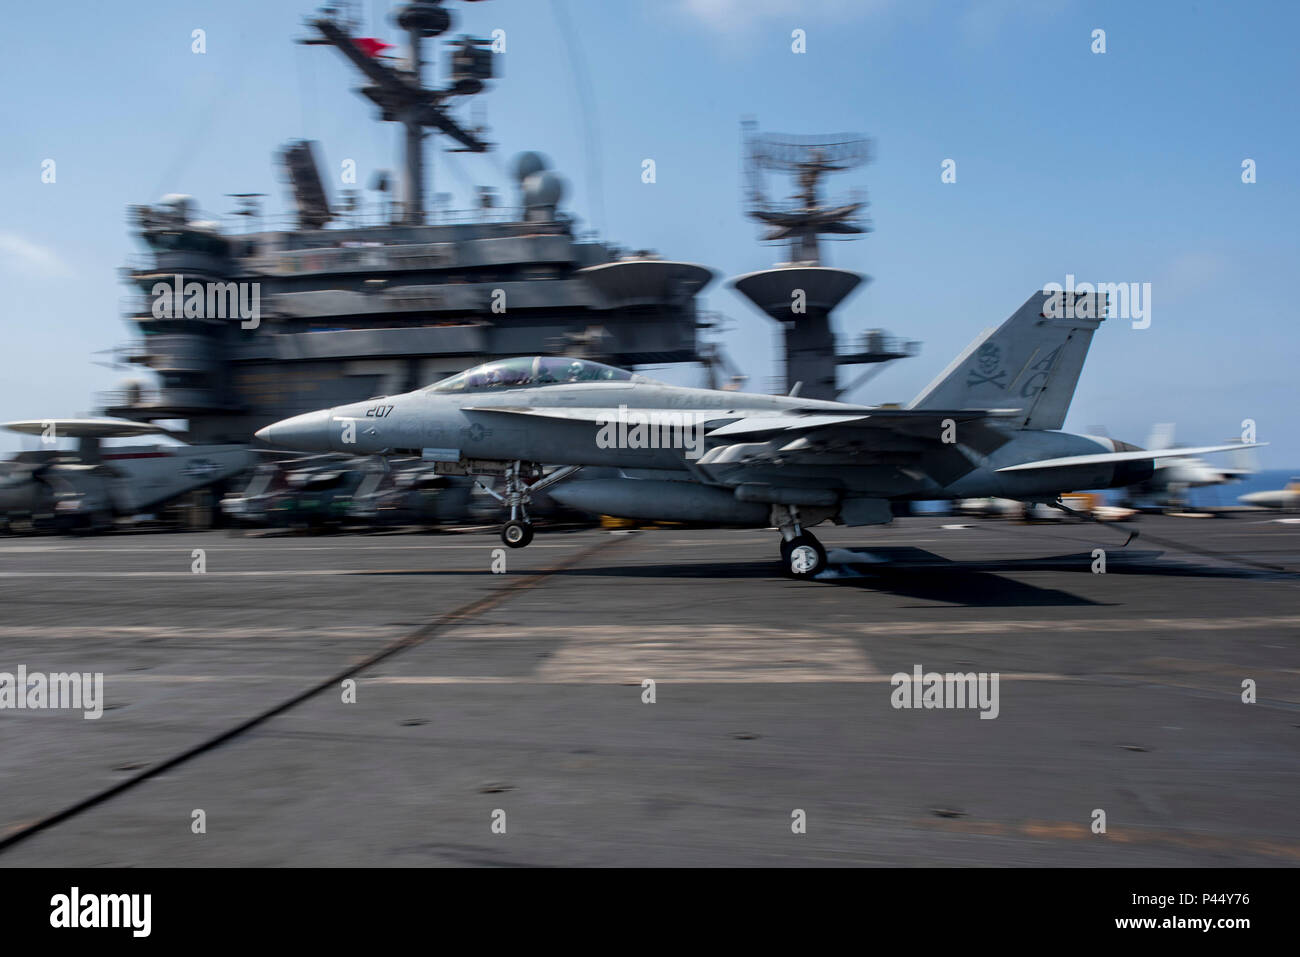 160626-N-DZ642-104 MEDITERRANEAN SEA (June 26, 2016) An F/A-18F Super Hornet, assigned to the “Jolly Rogers” of Strike Fighter Squadron (VFA) 103, lands on the flight deck of aircraft carrier USS Harry S. Truman (CVN 75). Harry S. Truman Carrier Strike Group is deployed in support of maritime security operations and theater security cooperation efforts in the U.S. 6th Fleet area of operations. (U.S. Navy photo by Mass Communication Specialist 3rd Class Bobby J Siens/Released) Stock Photo